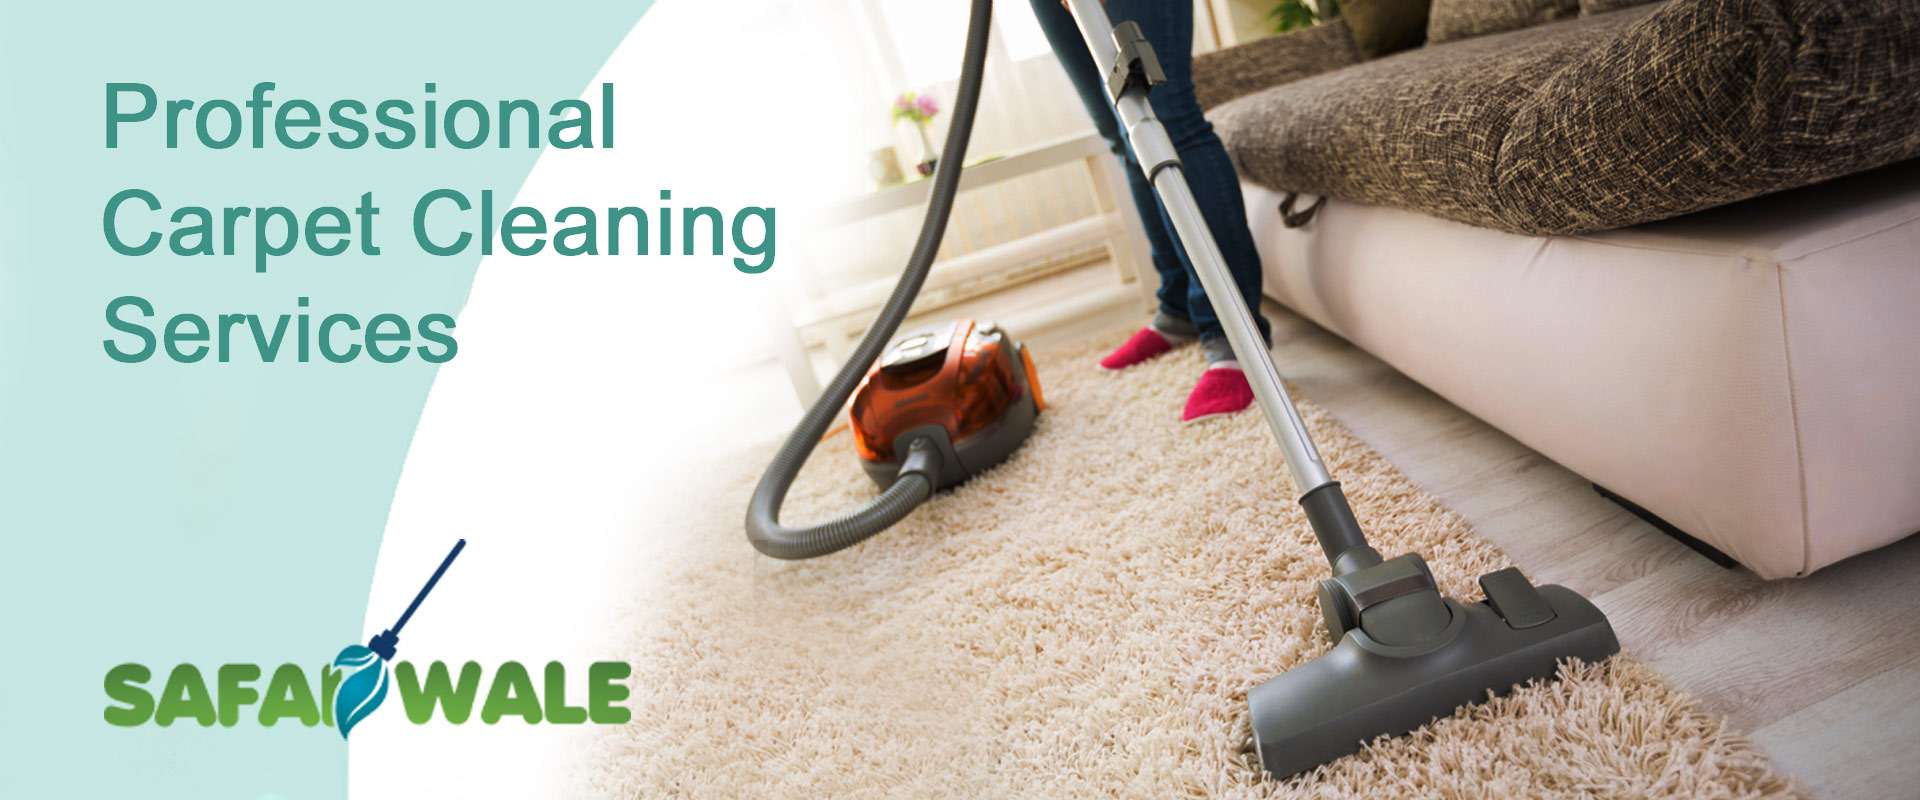 Carpet Cleaning Services In Ghodbunder Road, Thane